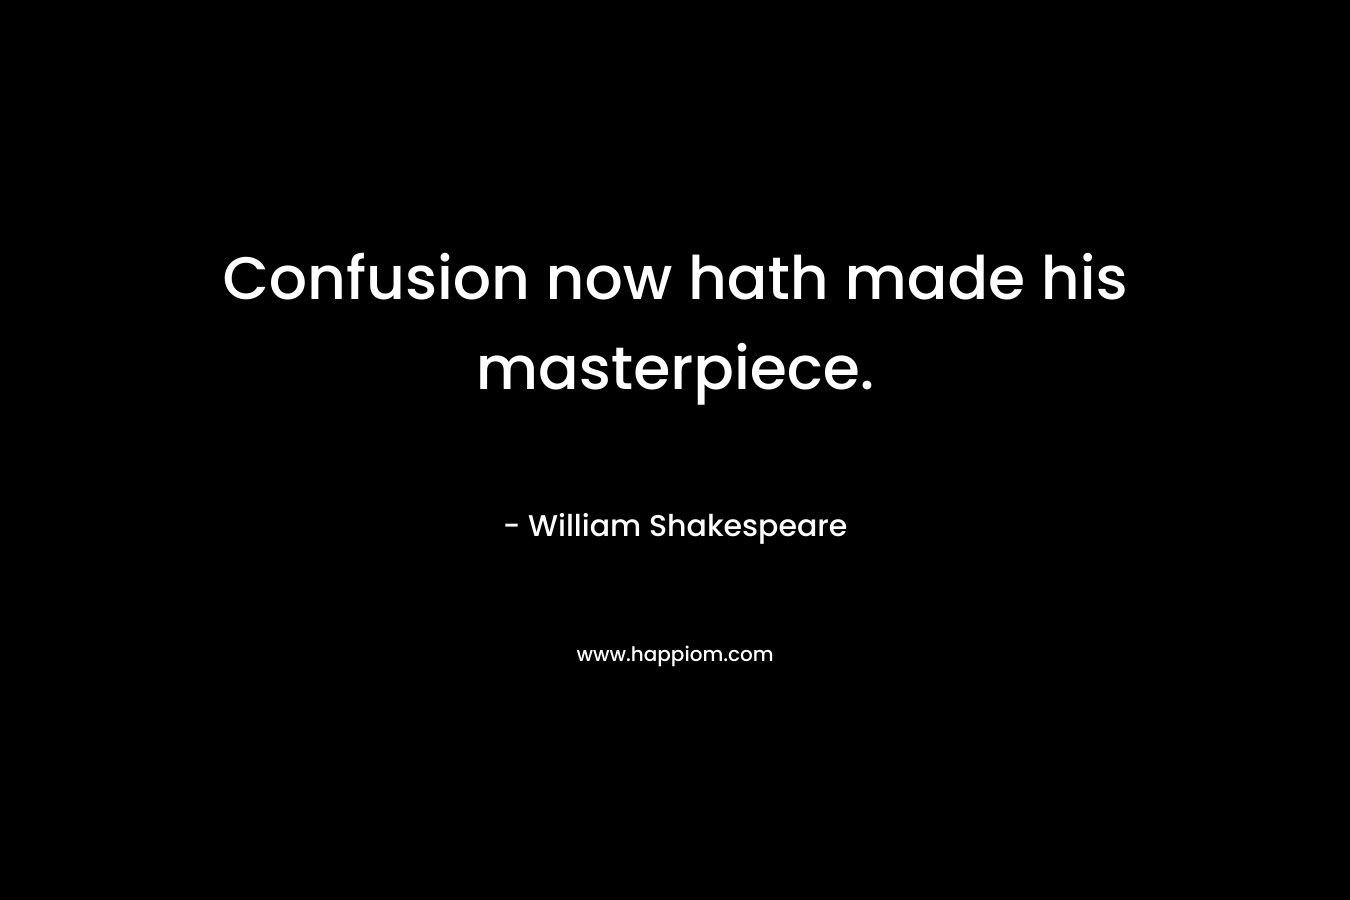 Confusion now hath made his masterpiece. – William Shakespeare